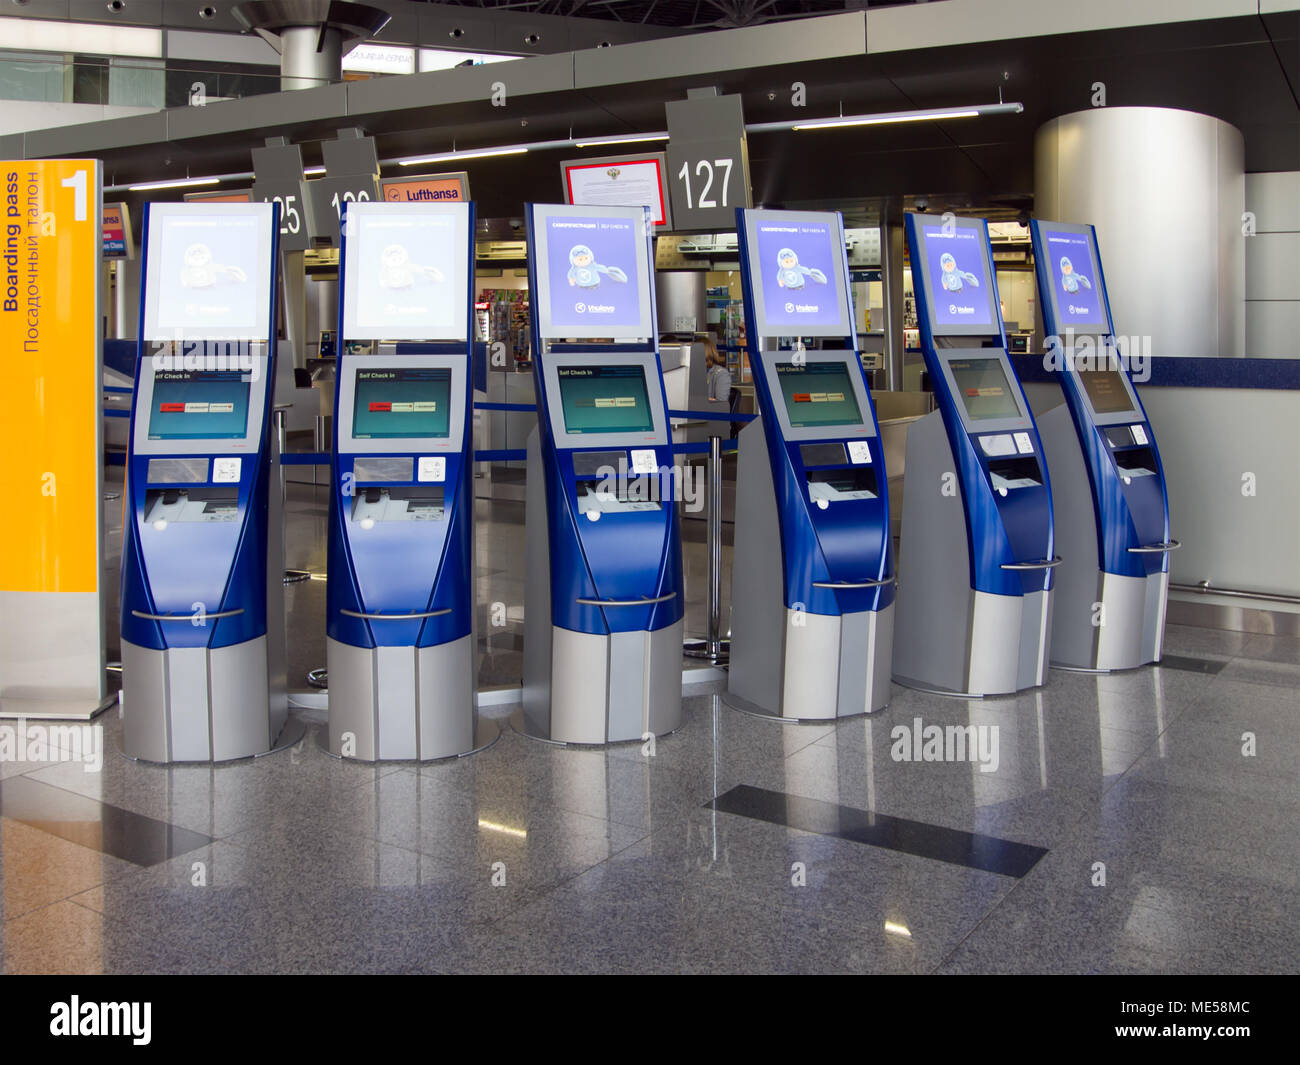 Moscow, Russia - May 18, 2013: Racks for self-check-in for flights, Vnukovo Airport, Moscow Stock Photo